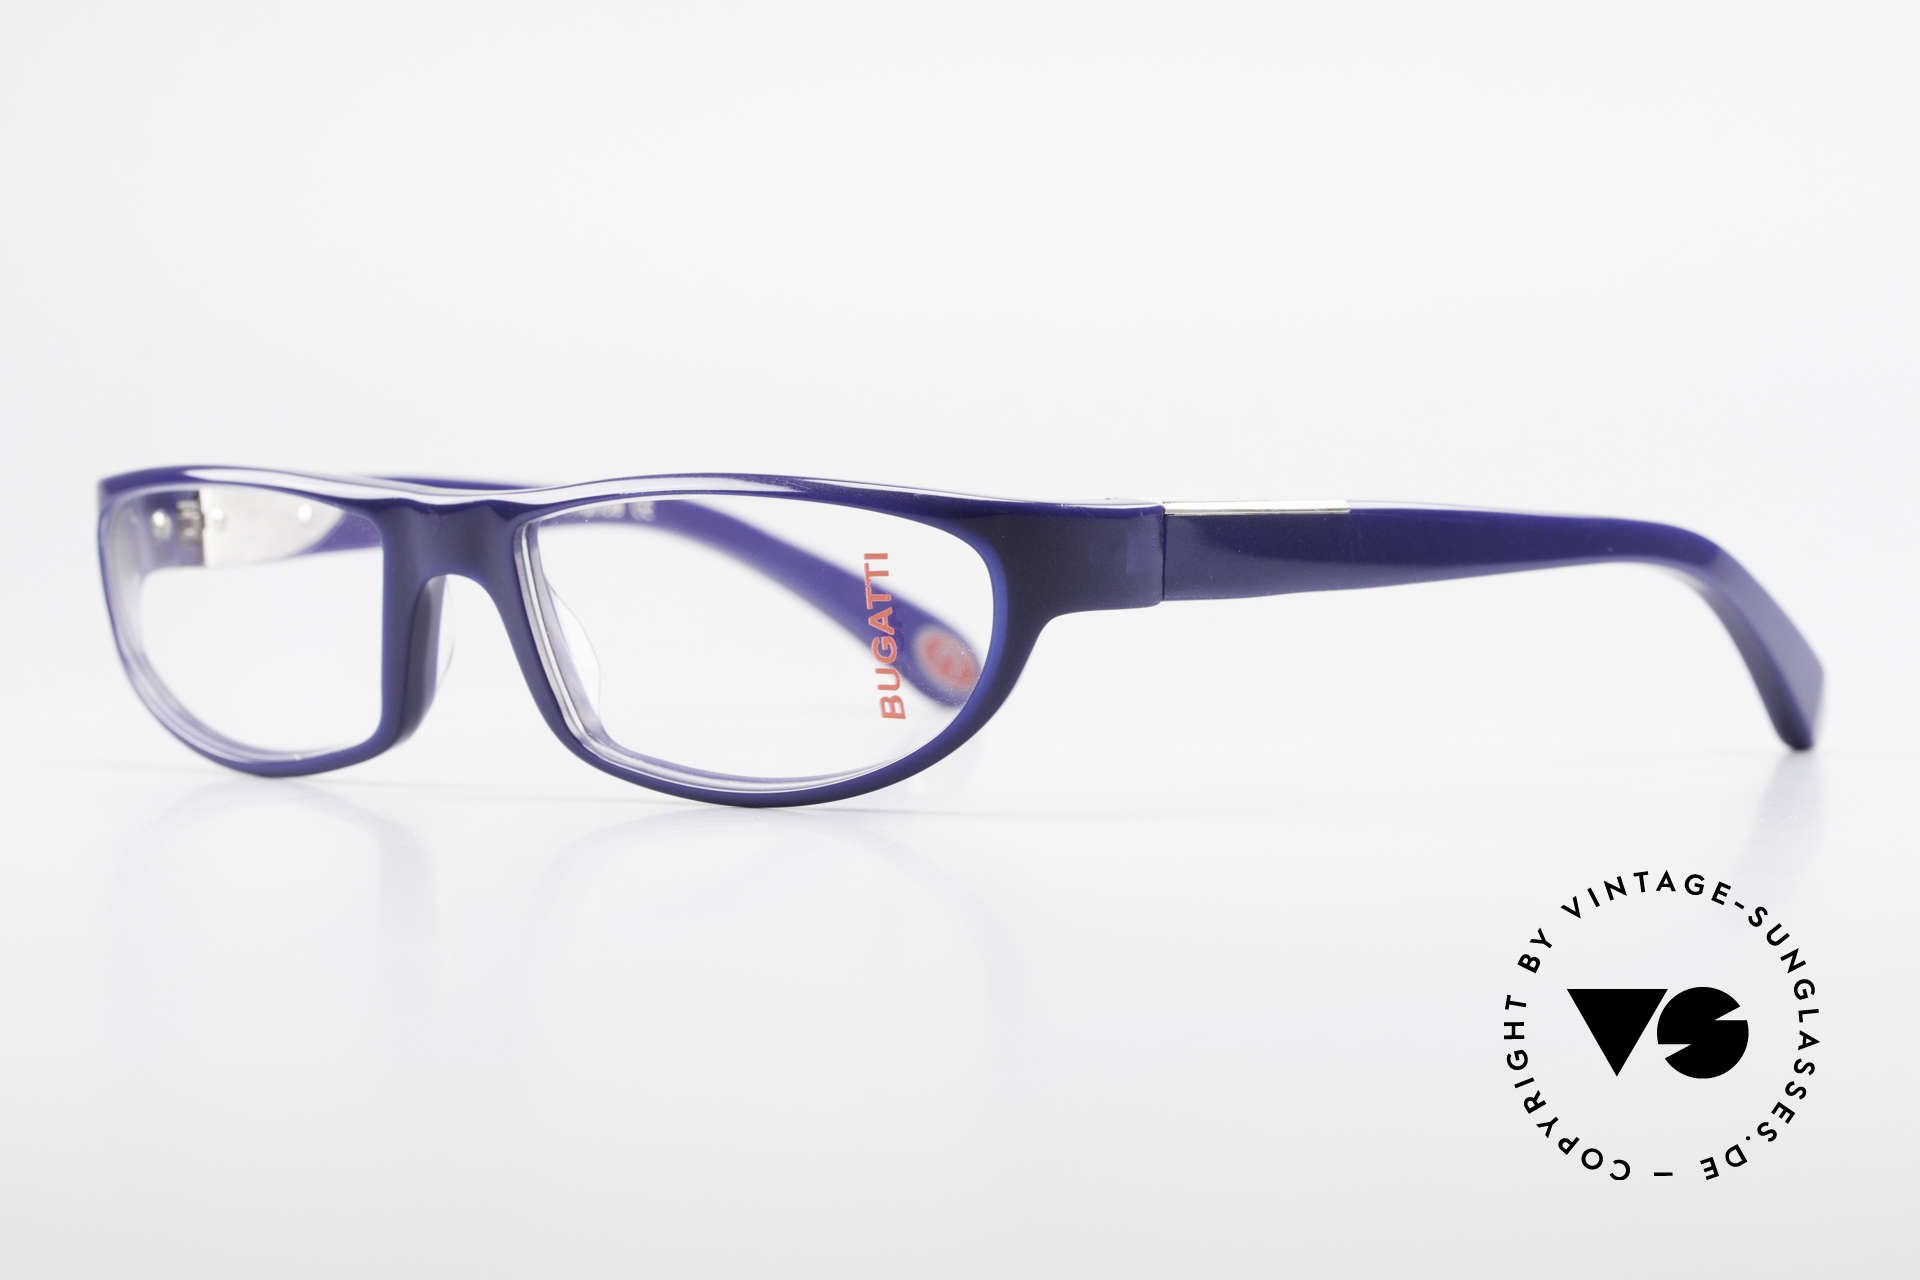 Bugatti 534 Men's Striking Plastic Frame, 1. class wearing comfort due to spring hinges, Made for Men